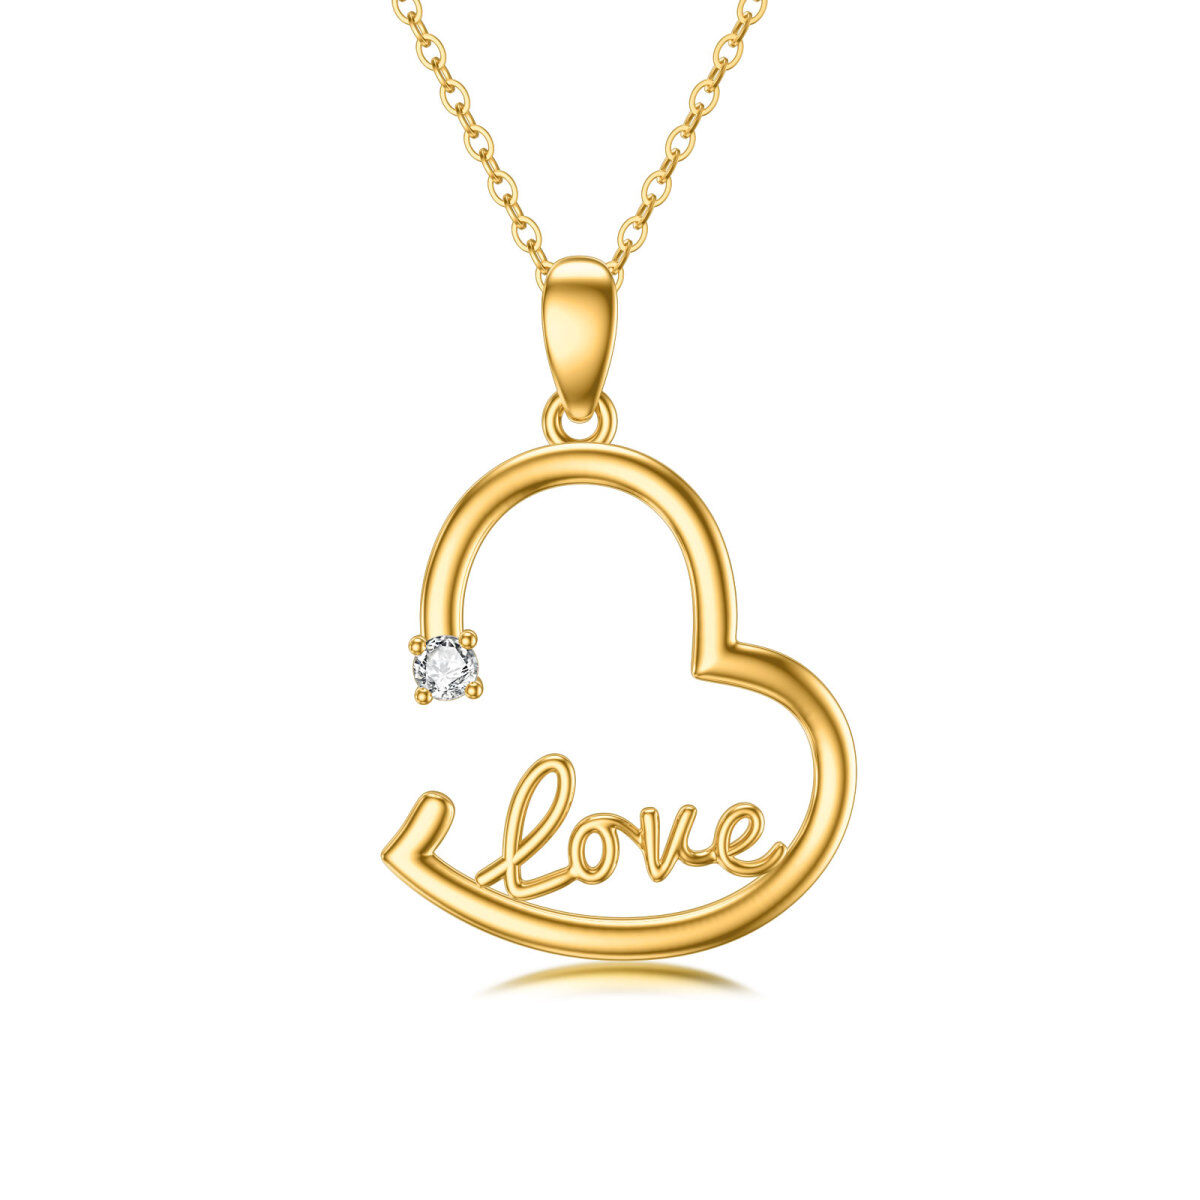 14K Gold Round Diamond Heart Pendant Necklace with Engraved Word-1